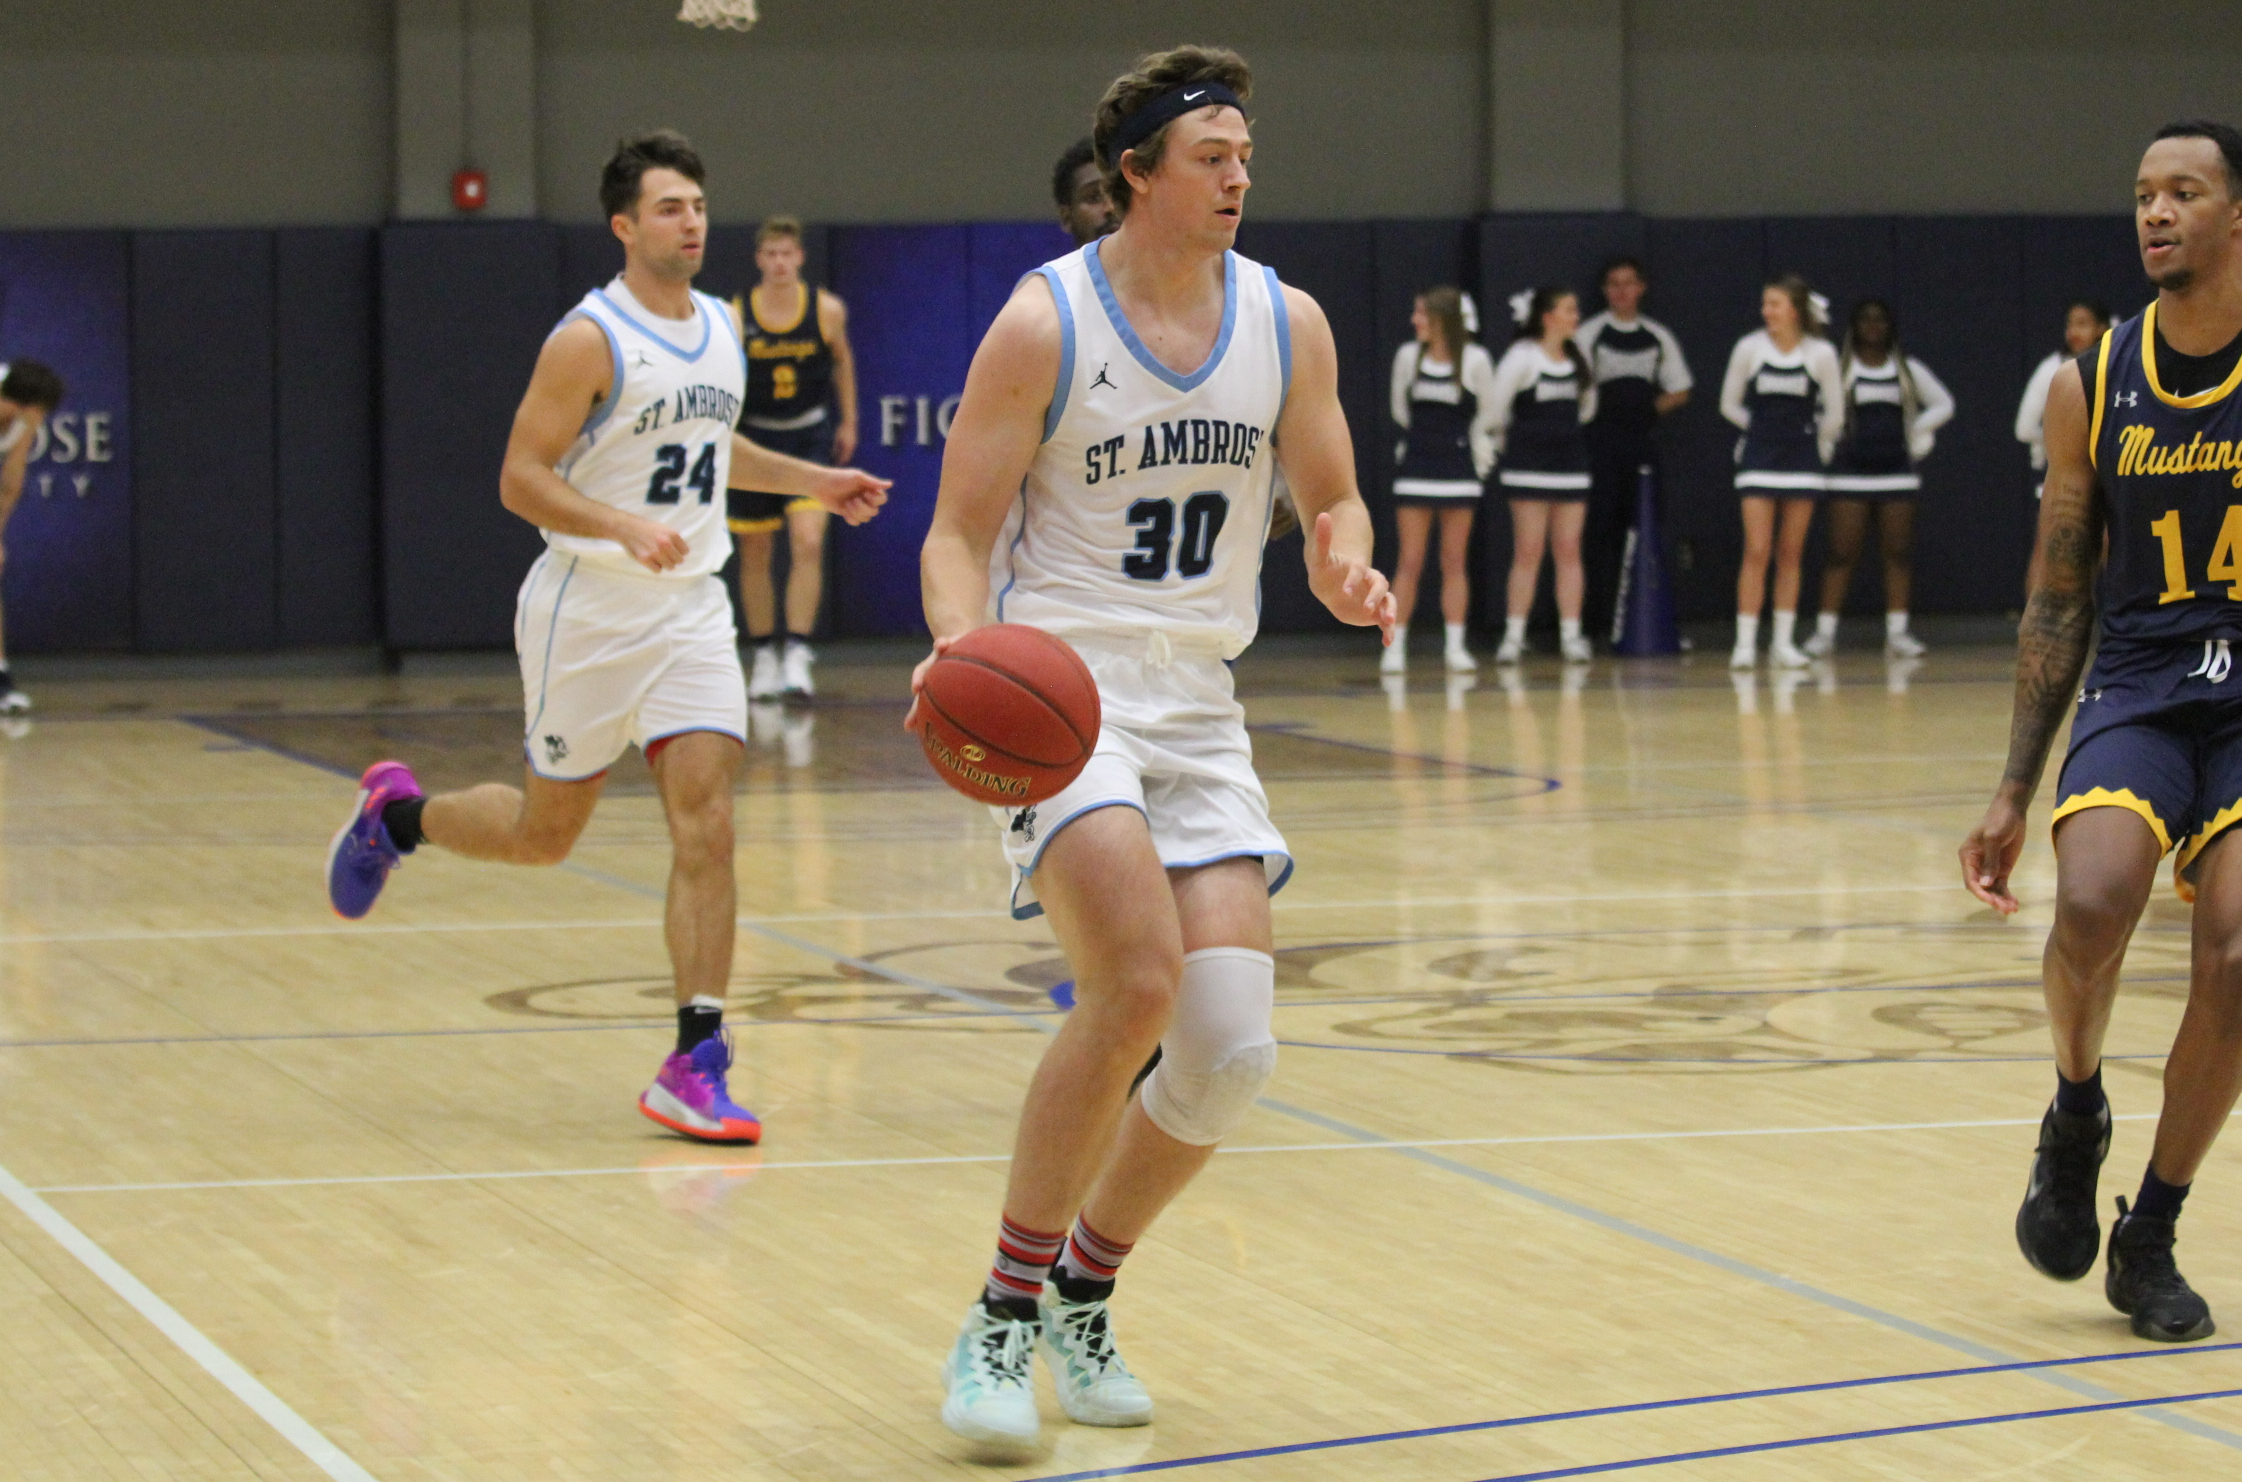 St. Ambrose falls to No. 14 Marian at Holiday Inn Tip-Off Classic